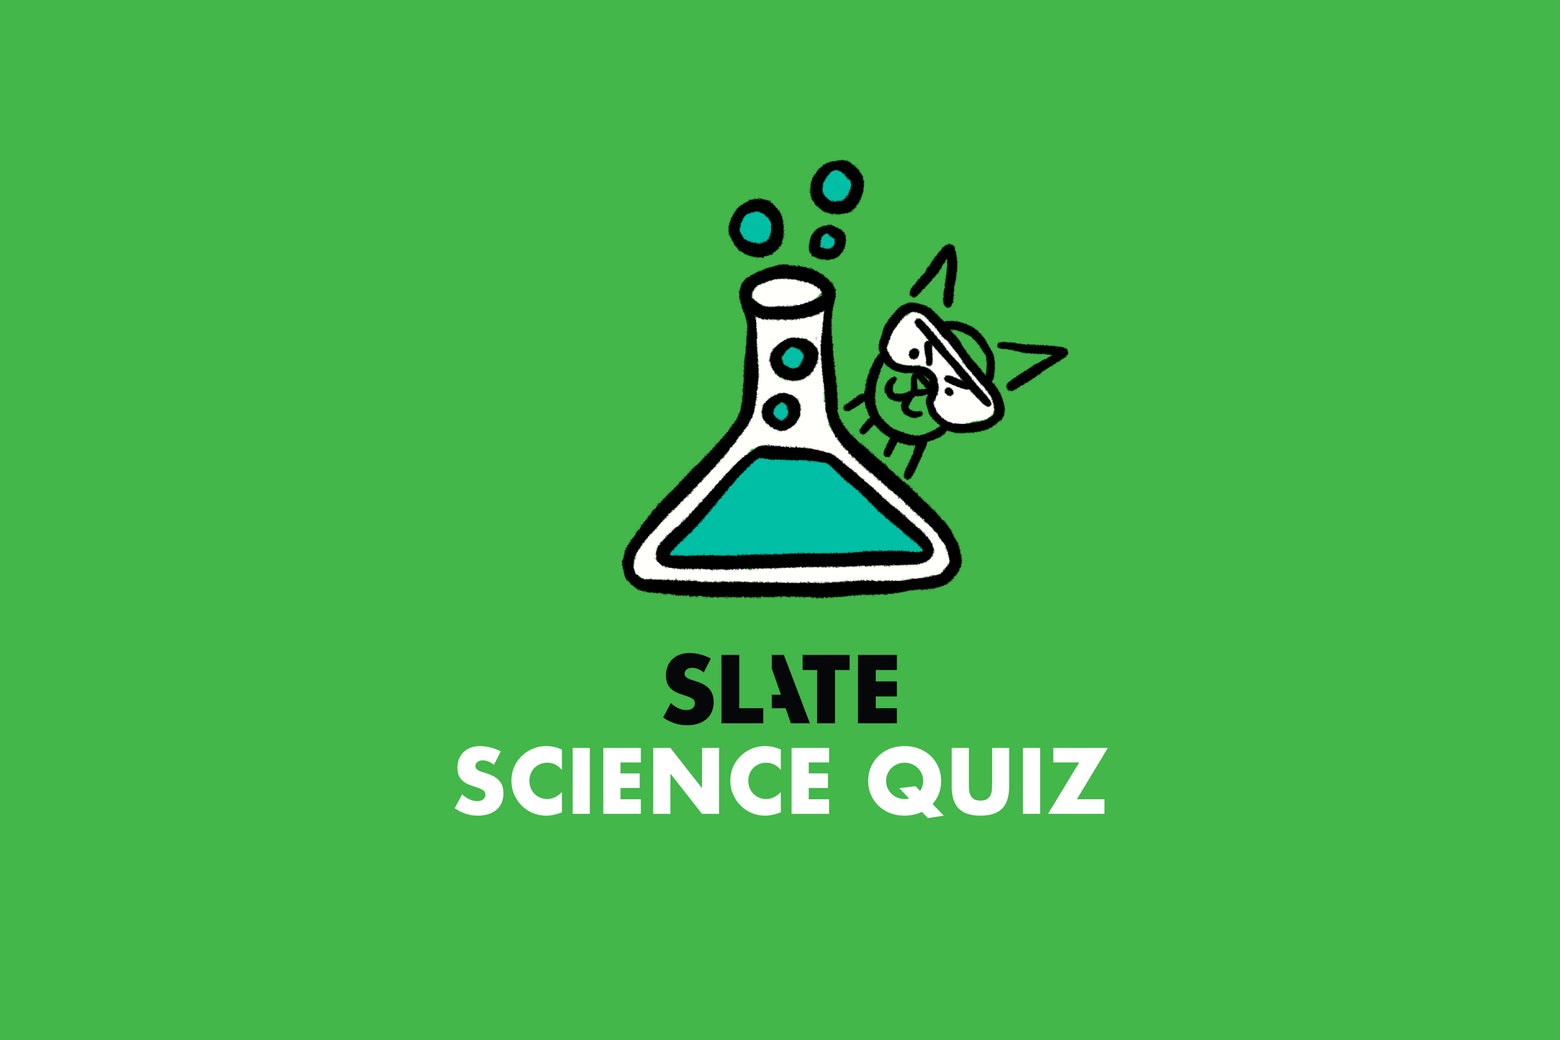 Daily Science Trivia with Slate